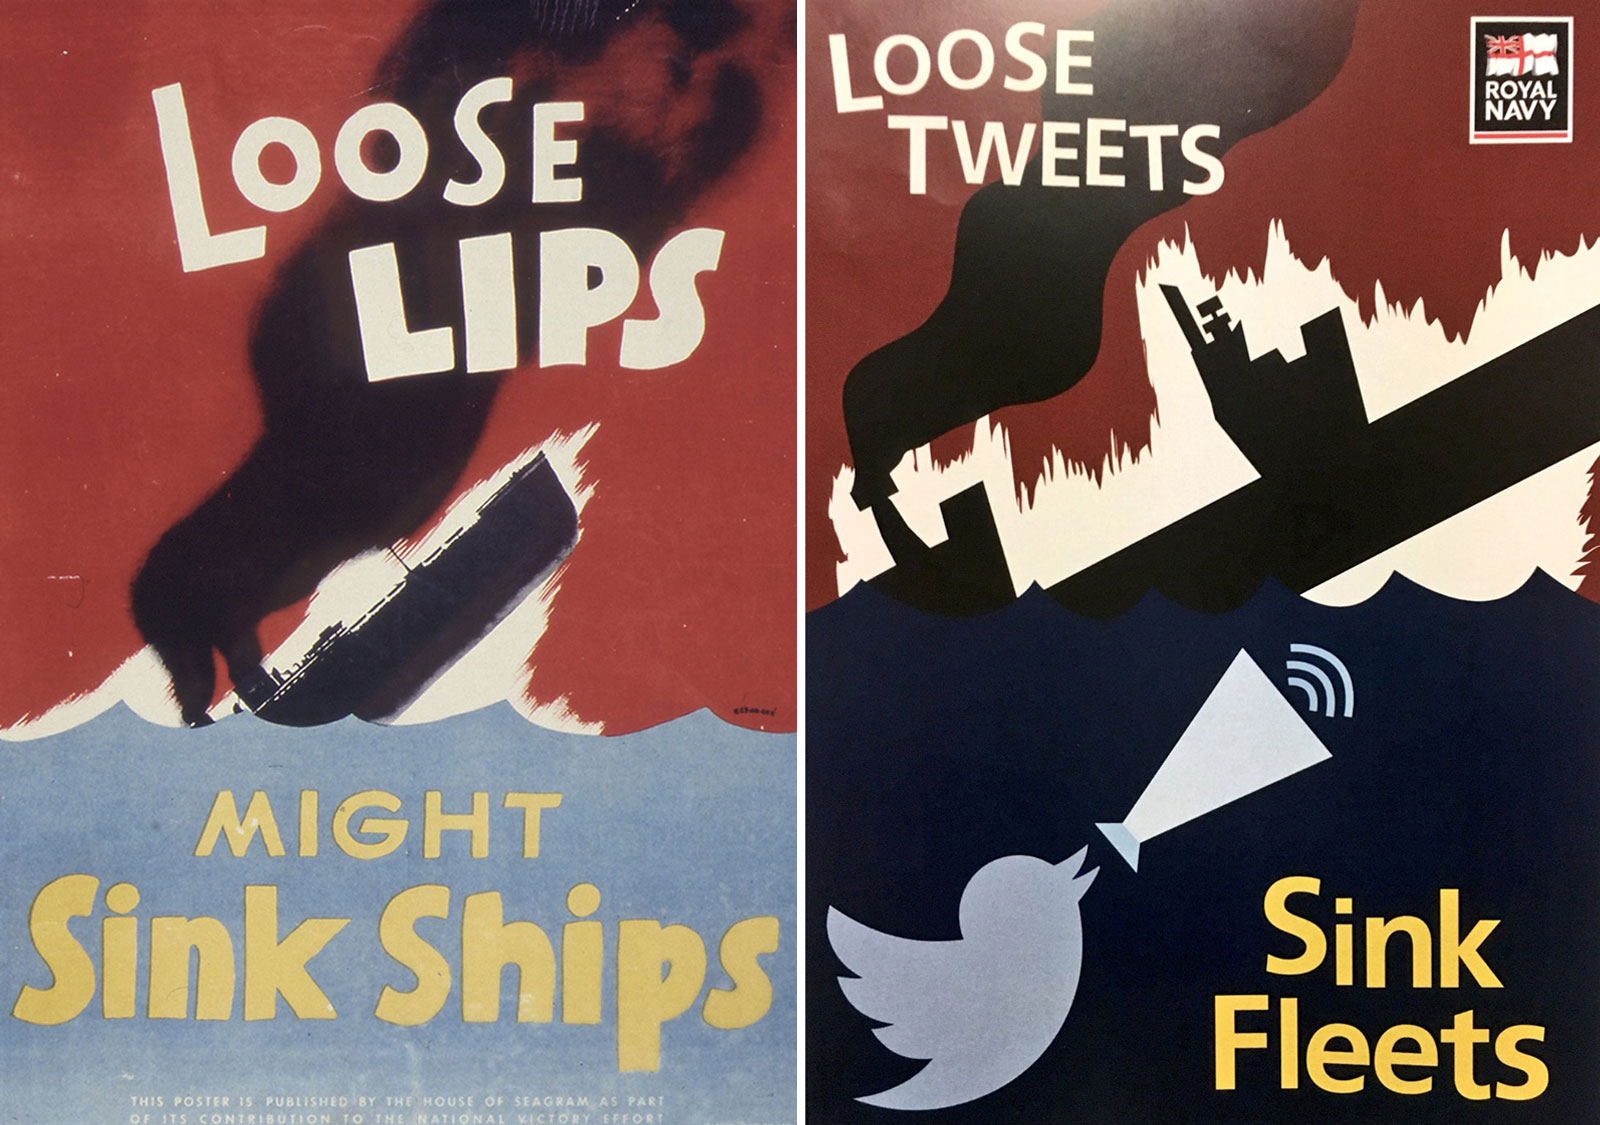 Loose Lips Sink Ships poster and modern reimagining